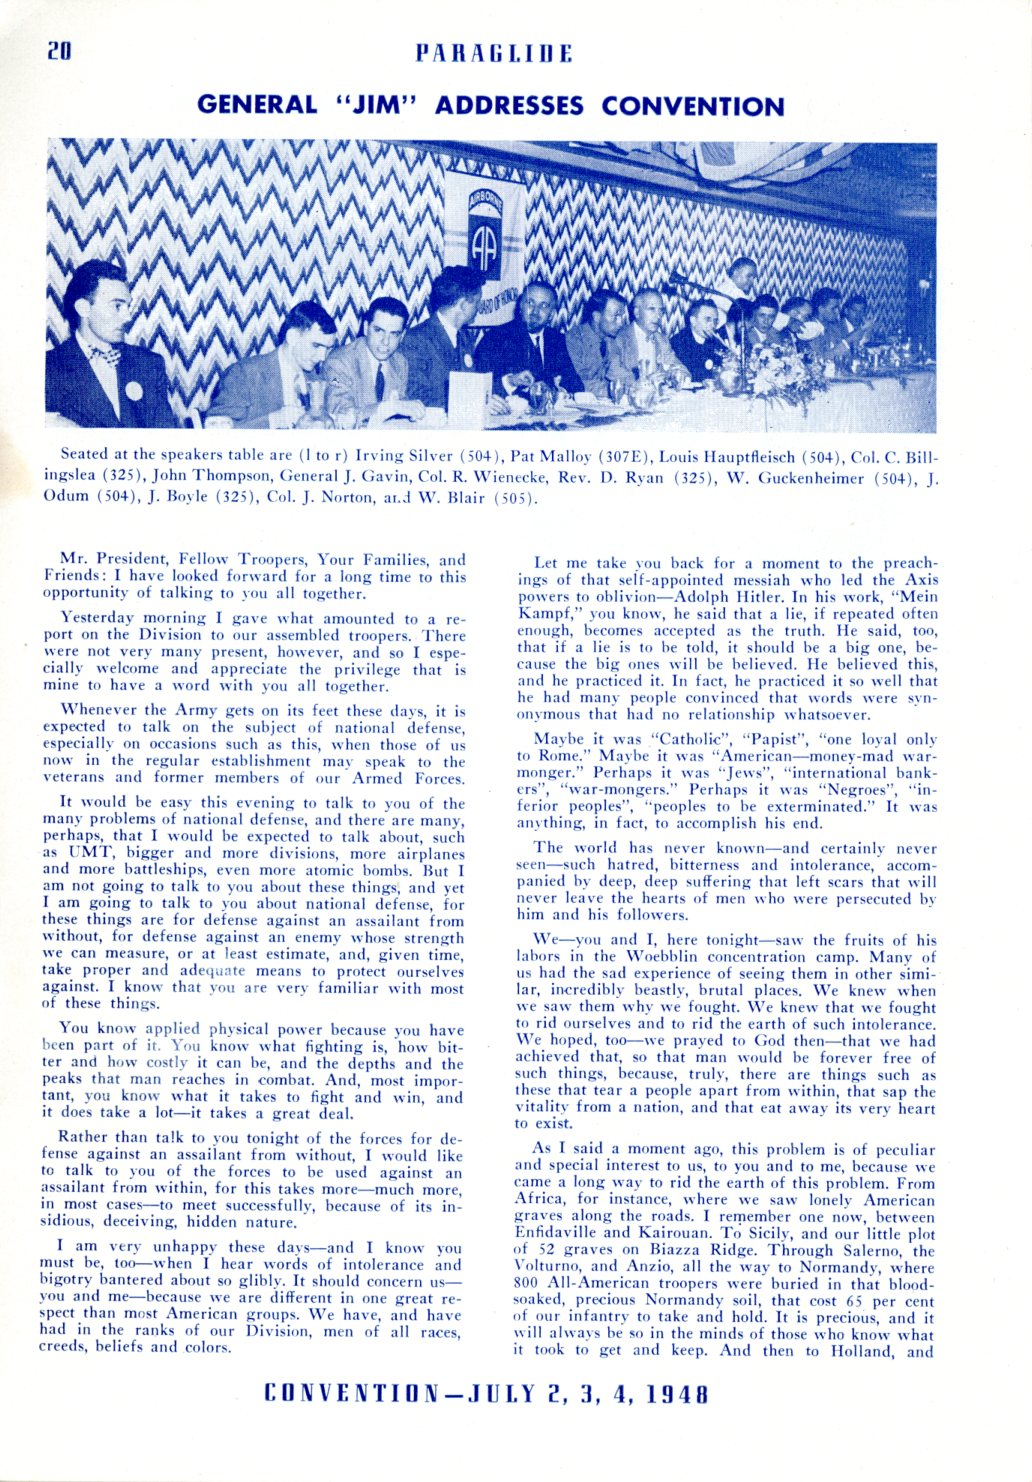 1947-Paraglide page-20